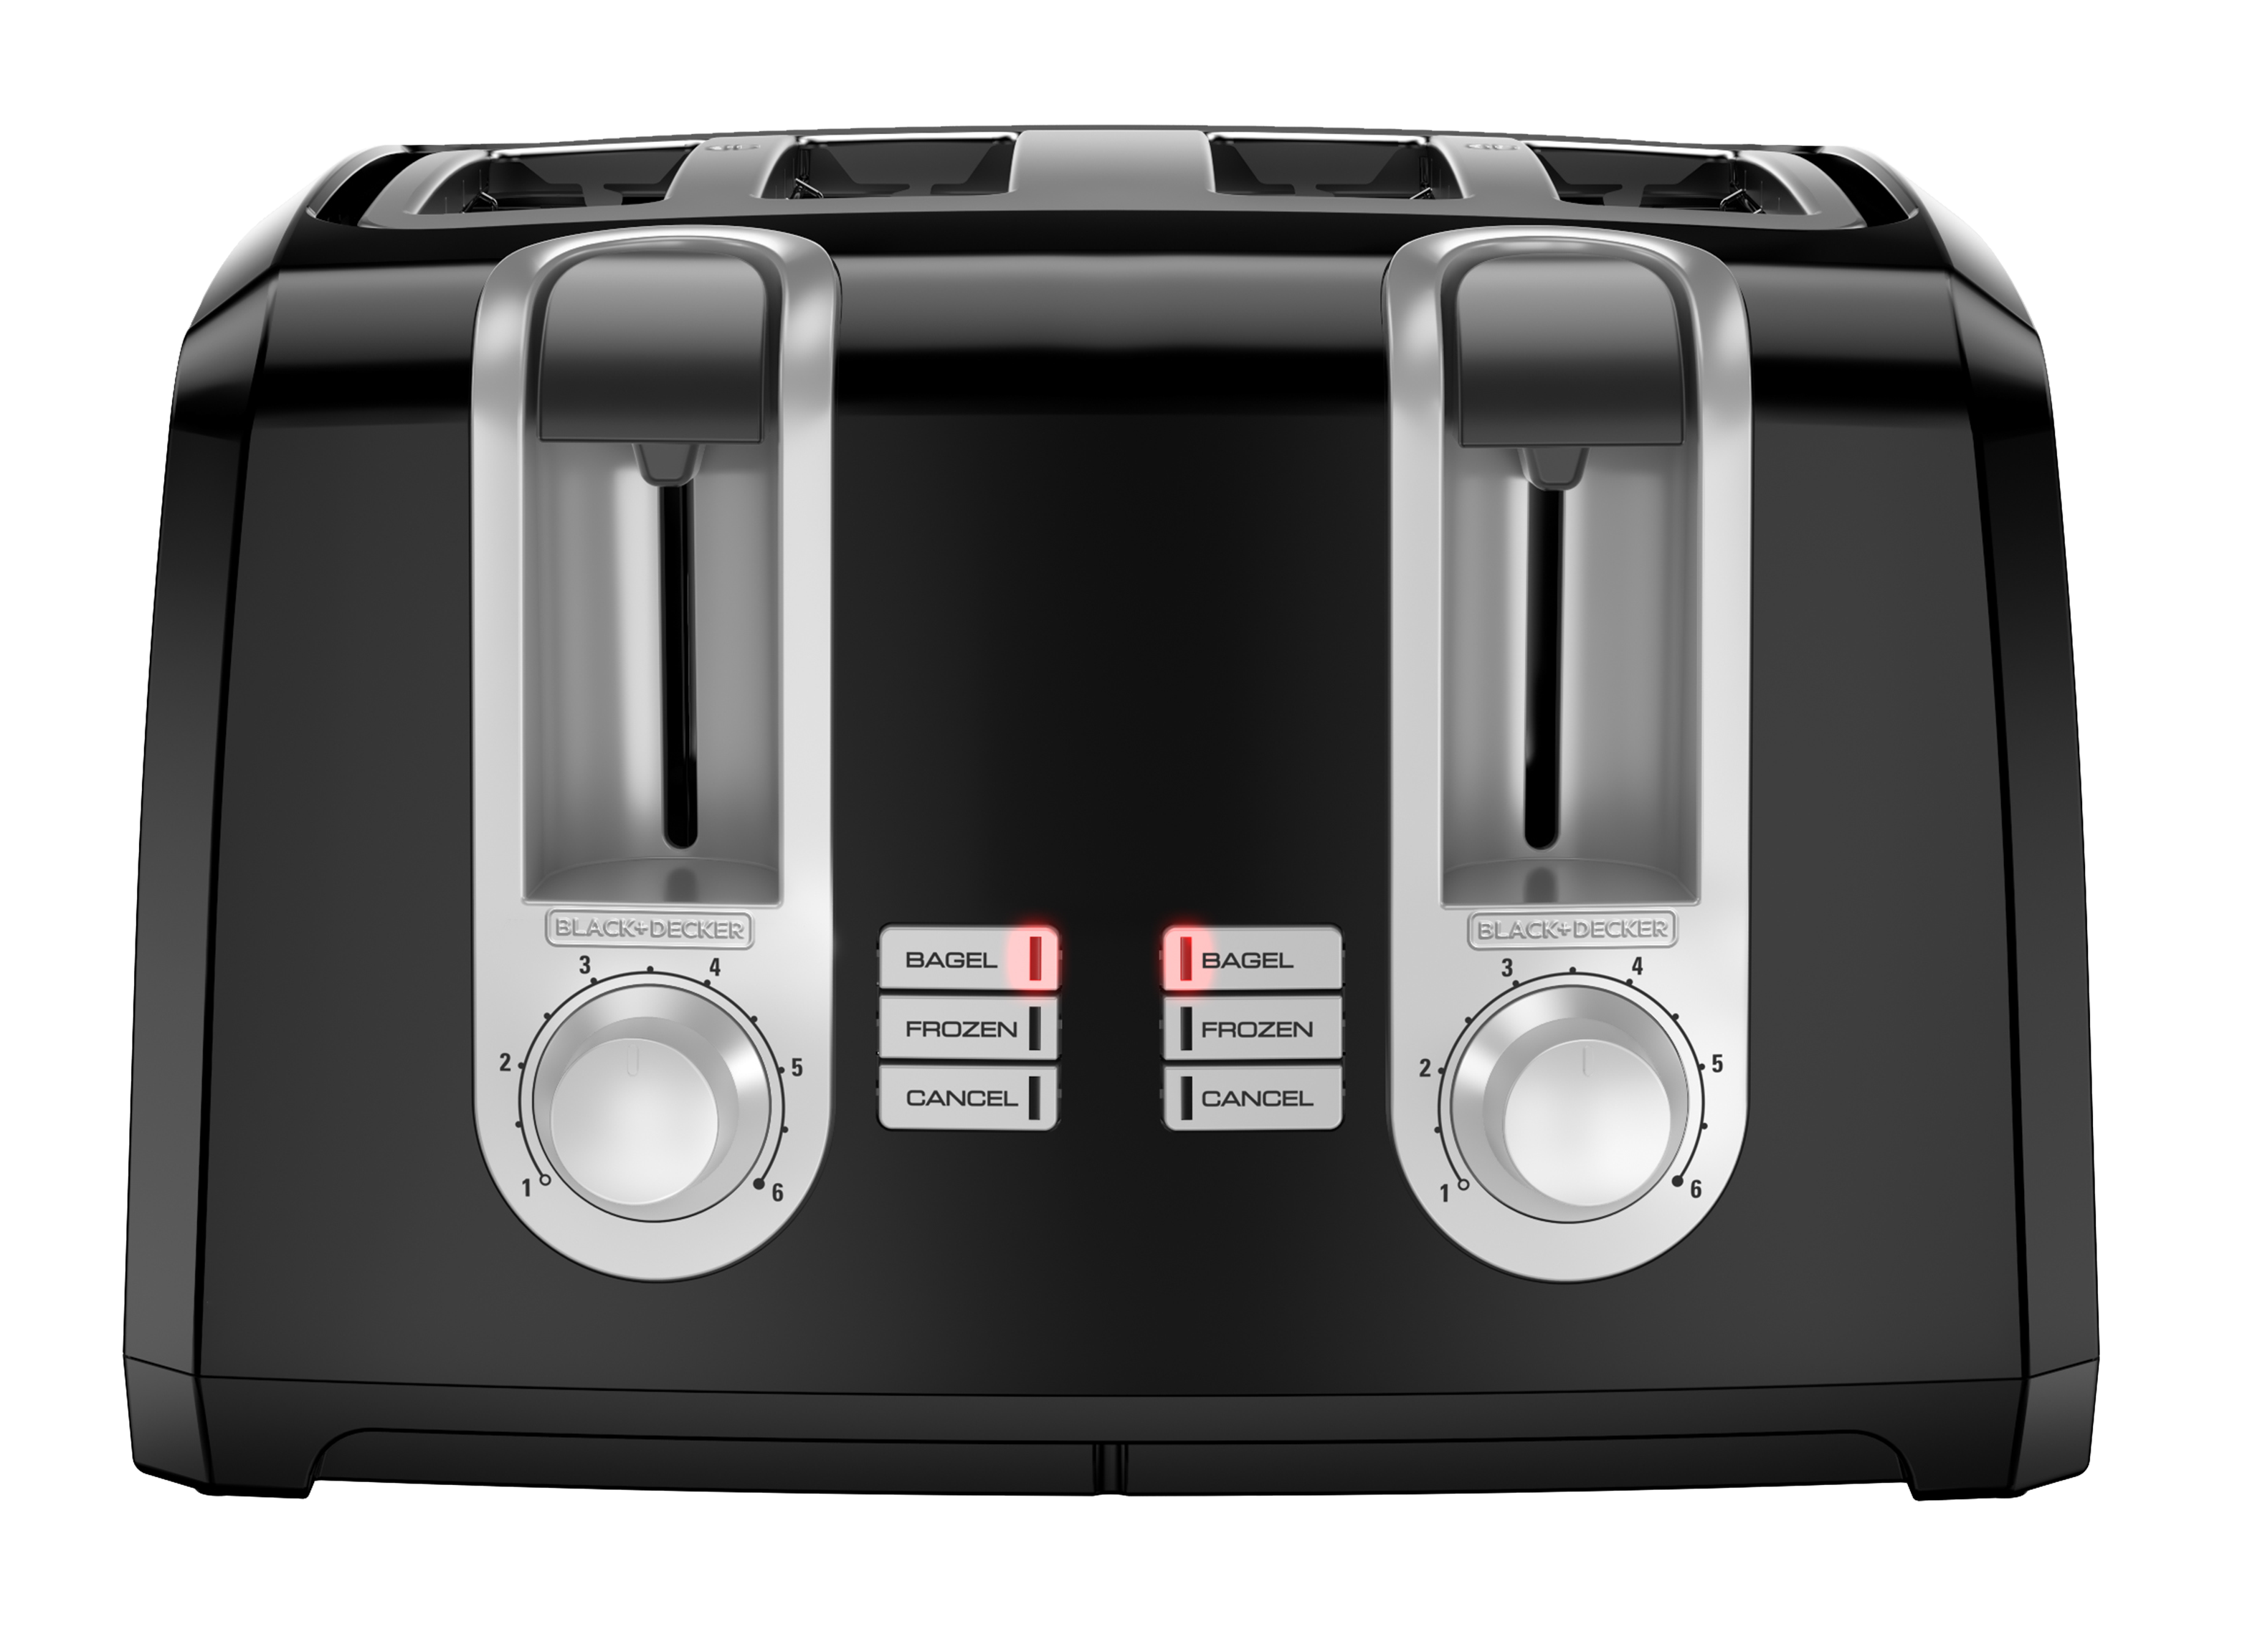 https://crdms.images.consumerreports.org/prod/products/cr/models/398527-toasters-black-decker-4-slice-extra-wide-slot-t4569b-10005049.png